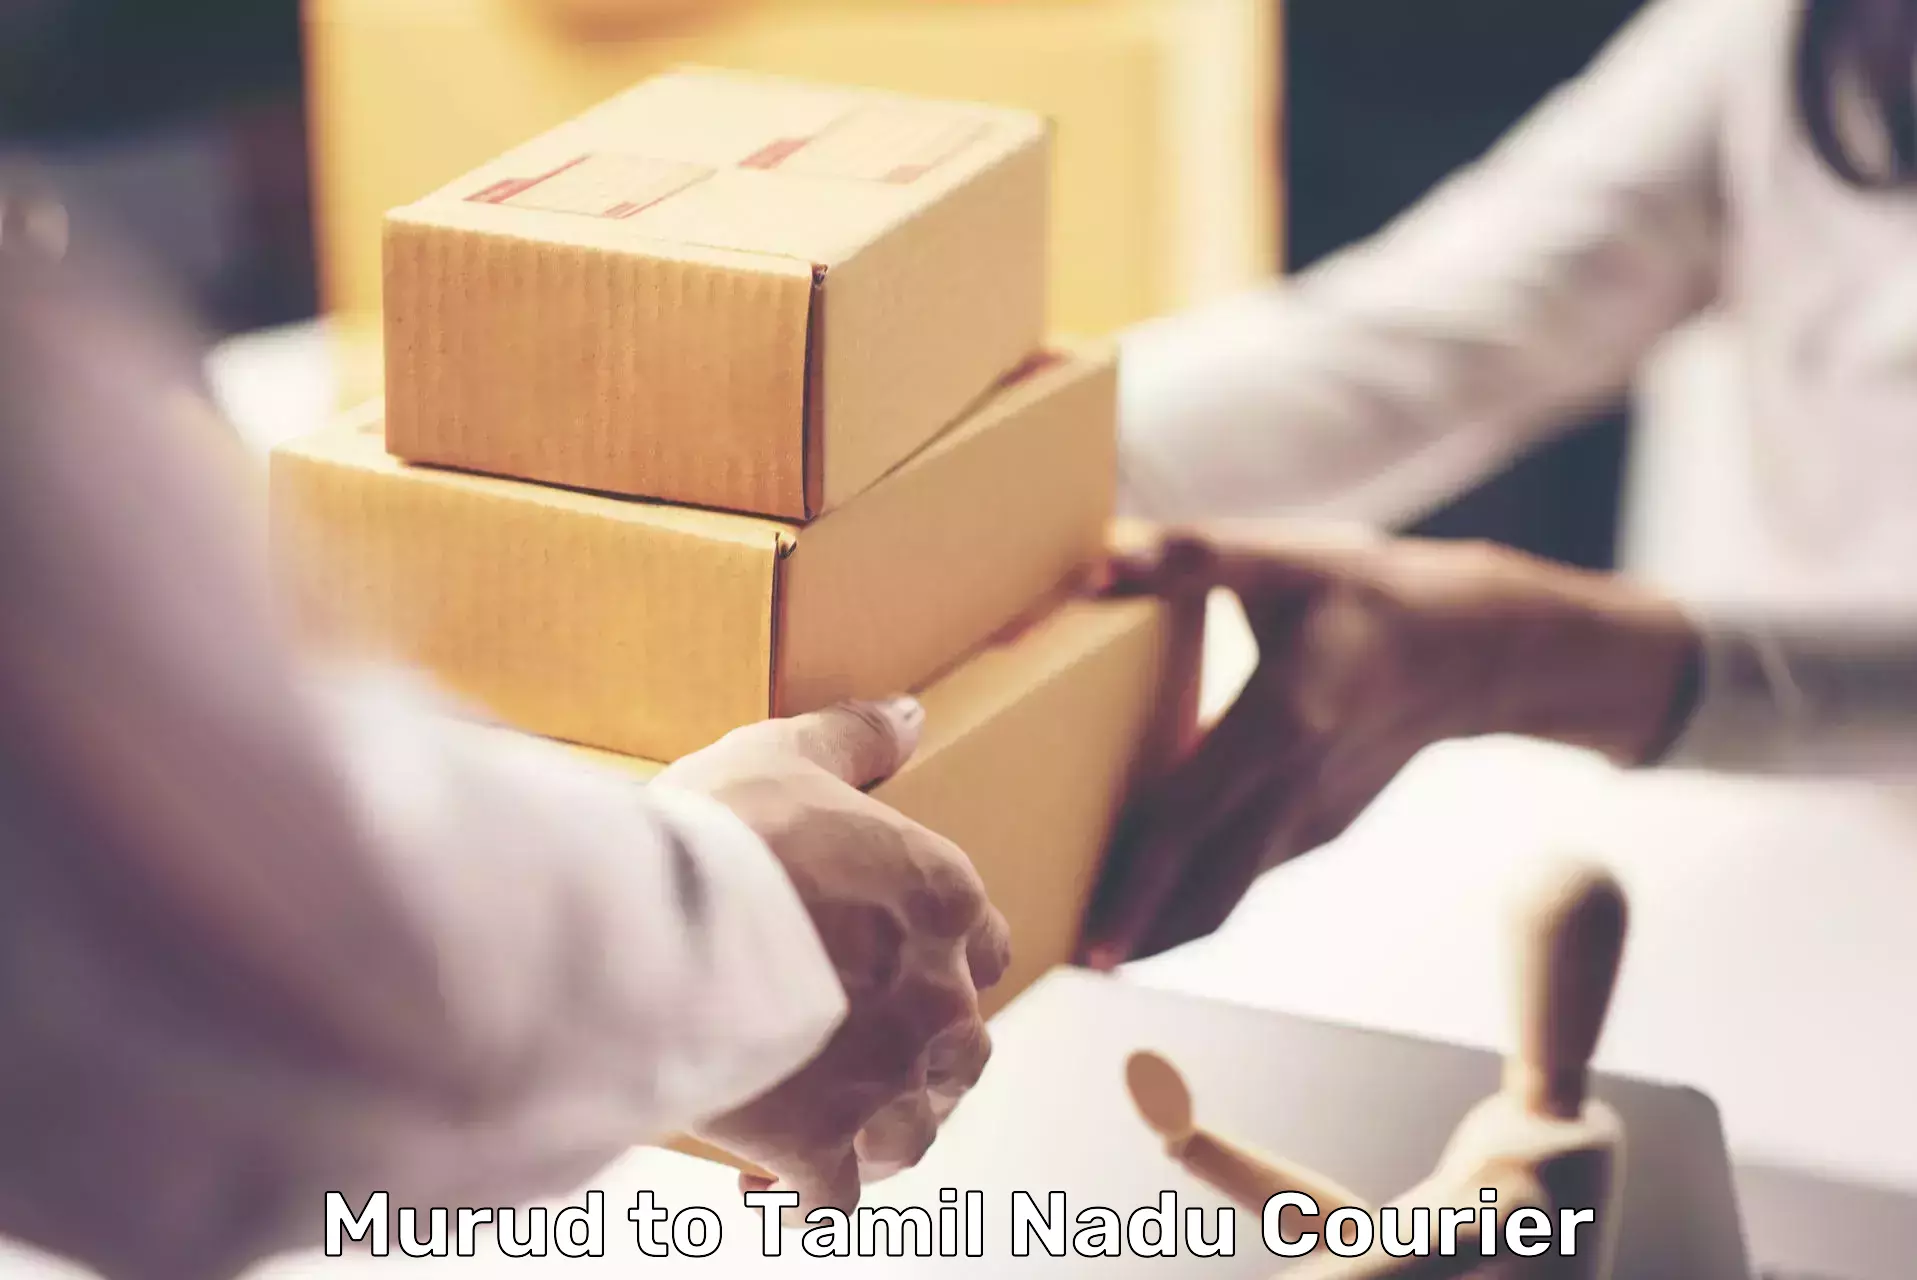 Courier tracking online in Murud to Ennore Port Chennai